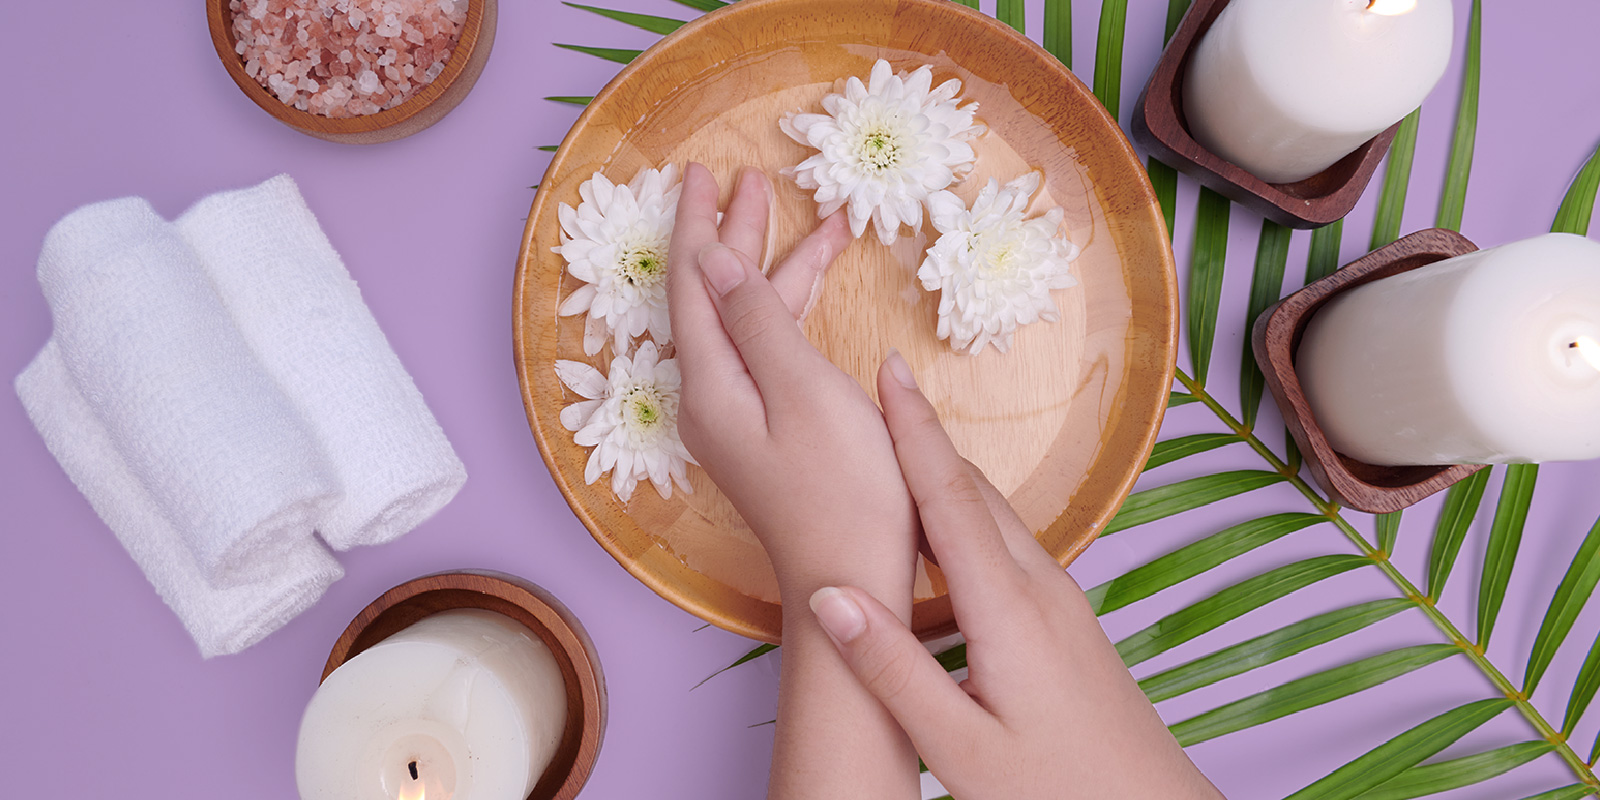 5 Natural Recipes to Strengthen Nails: The Secret Behind Healthy Nails